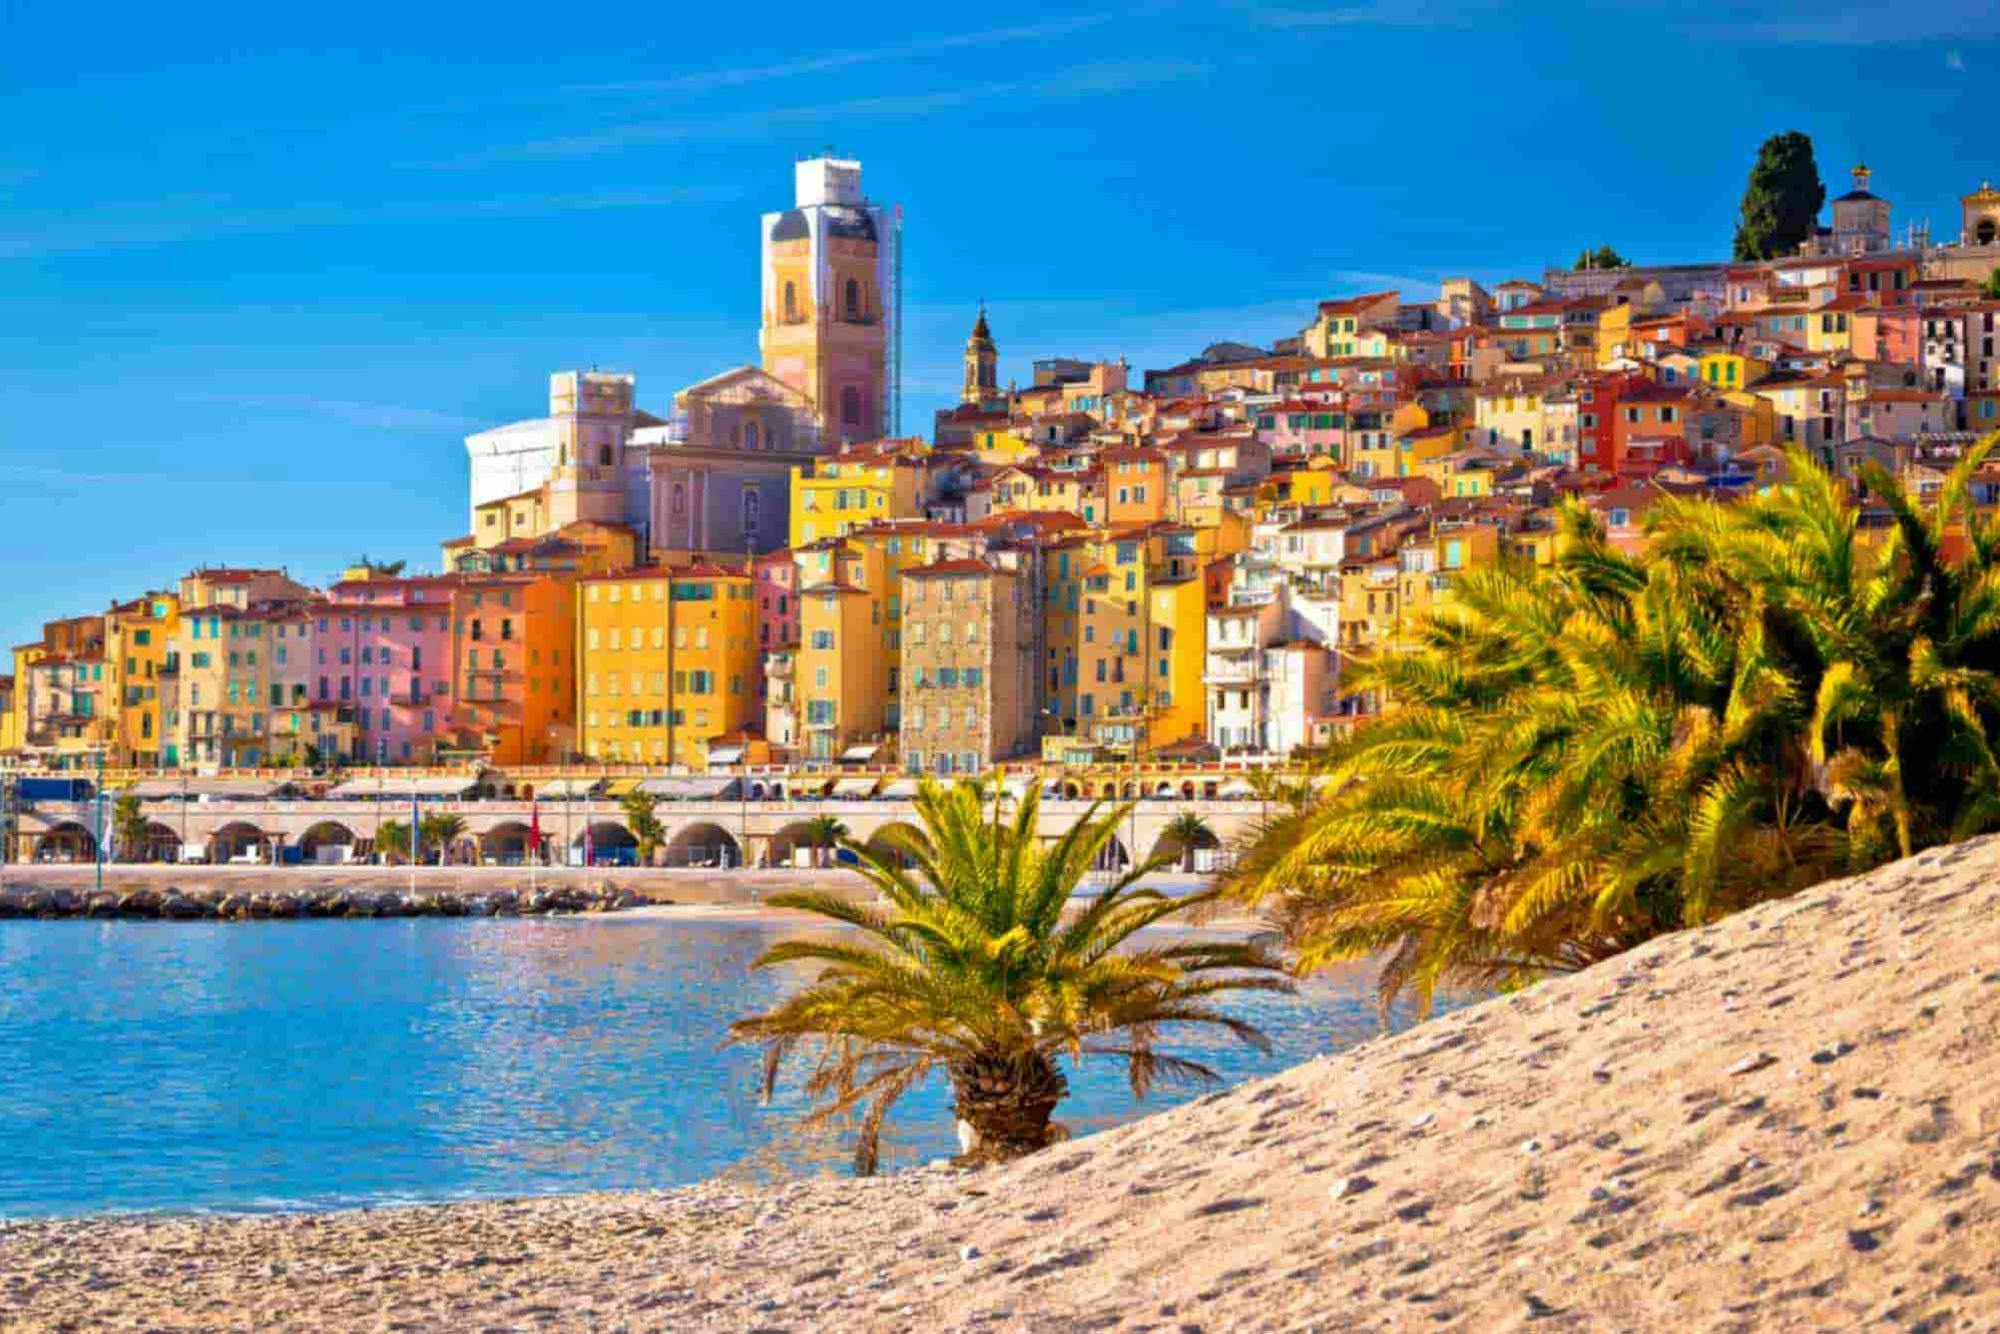 french riviera road trip